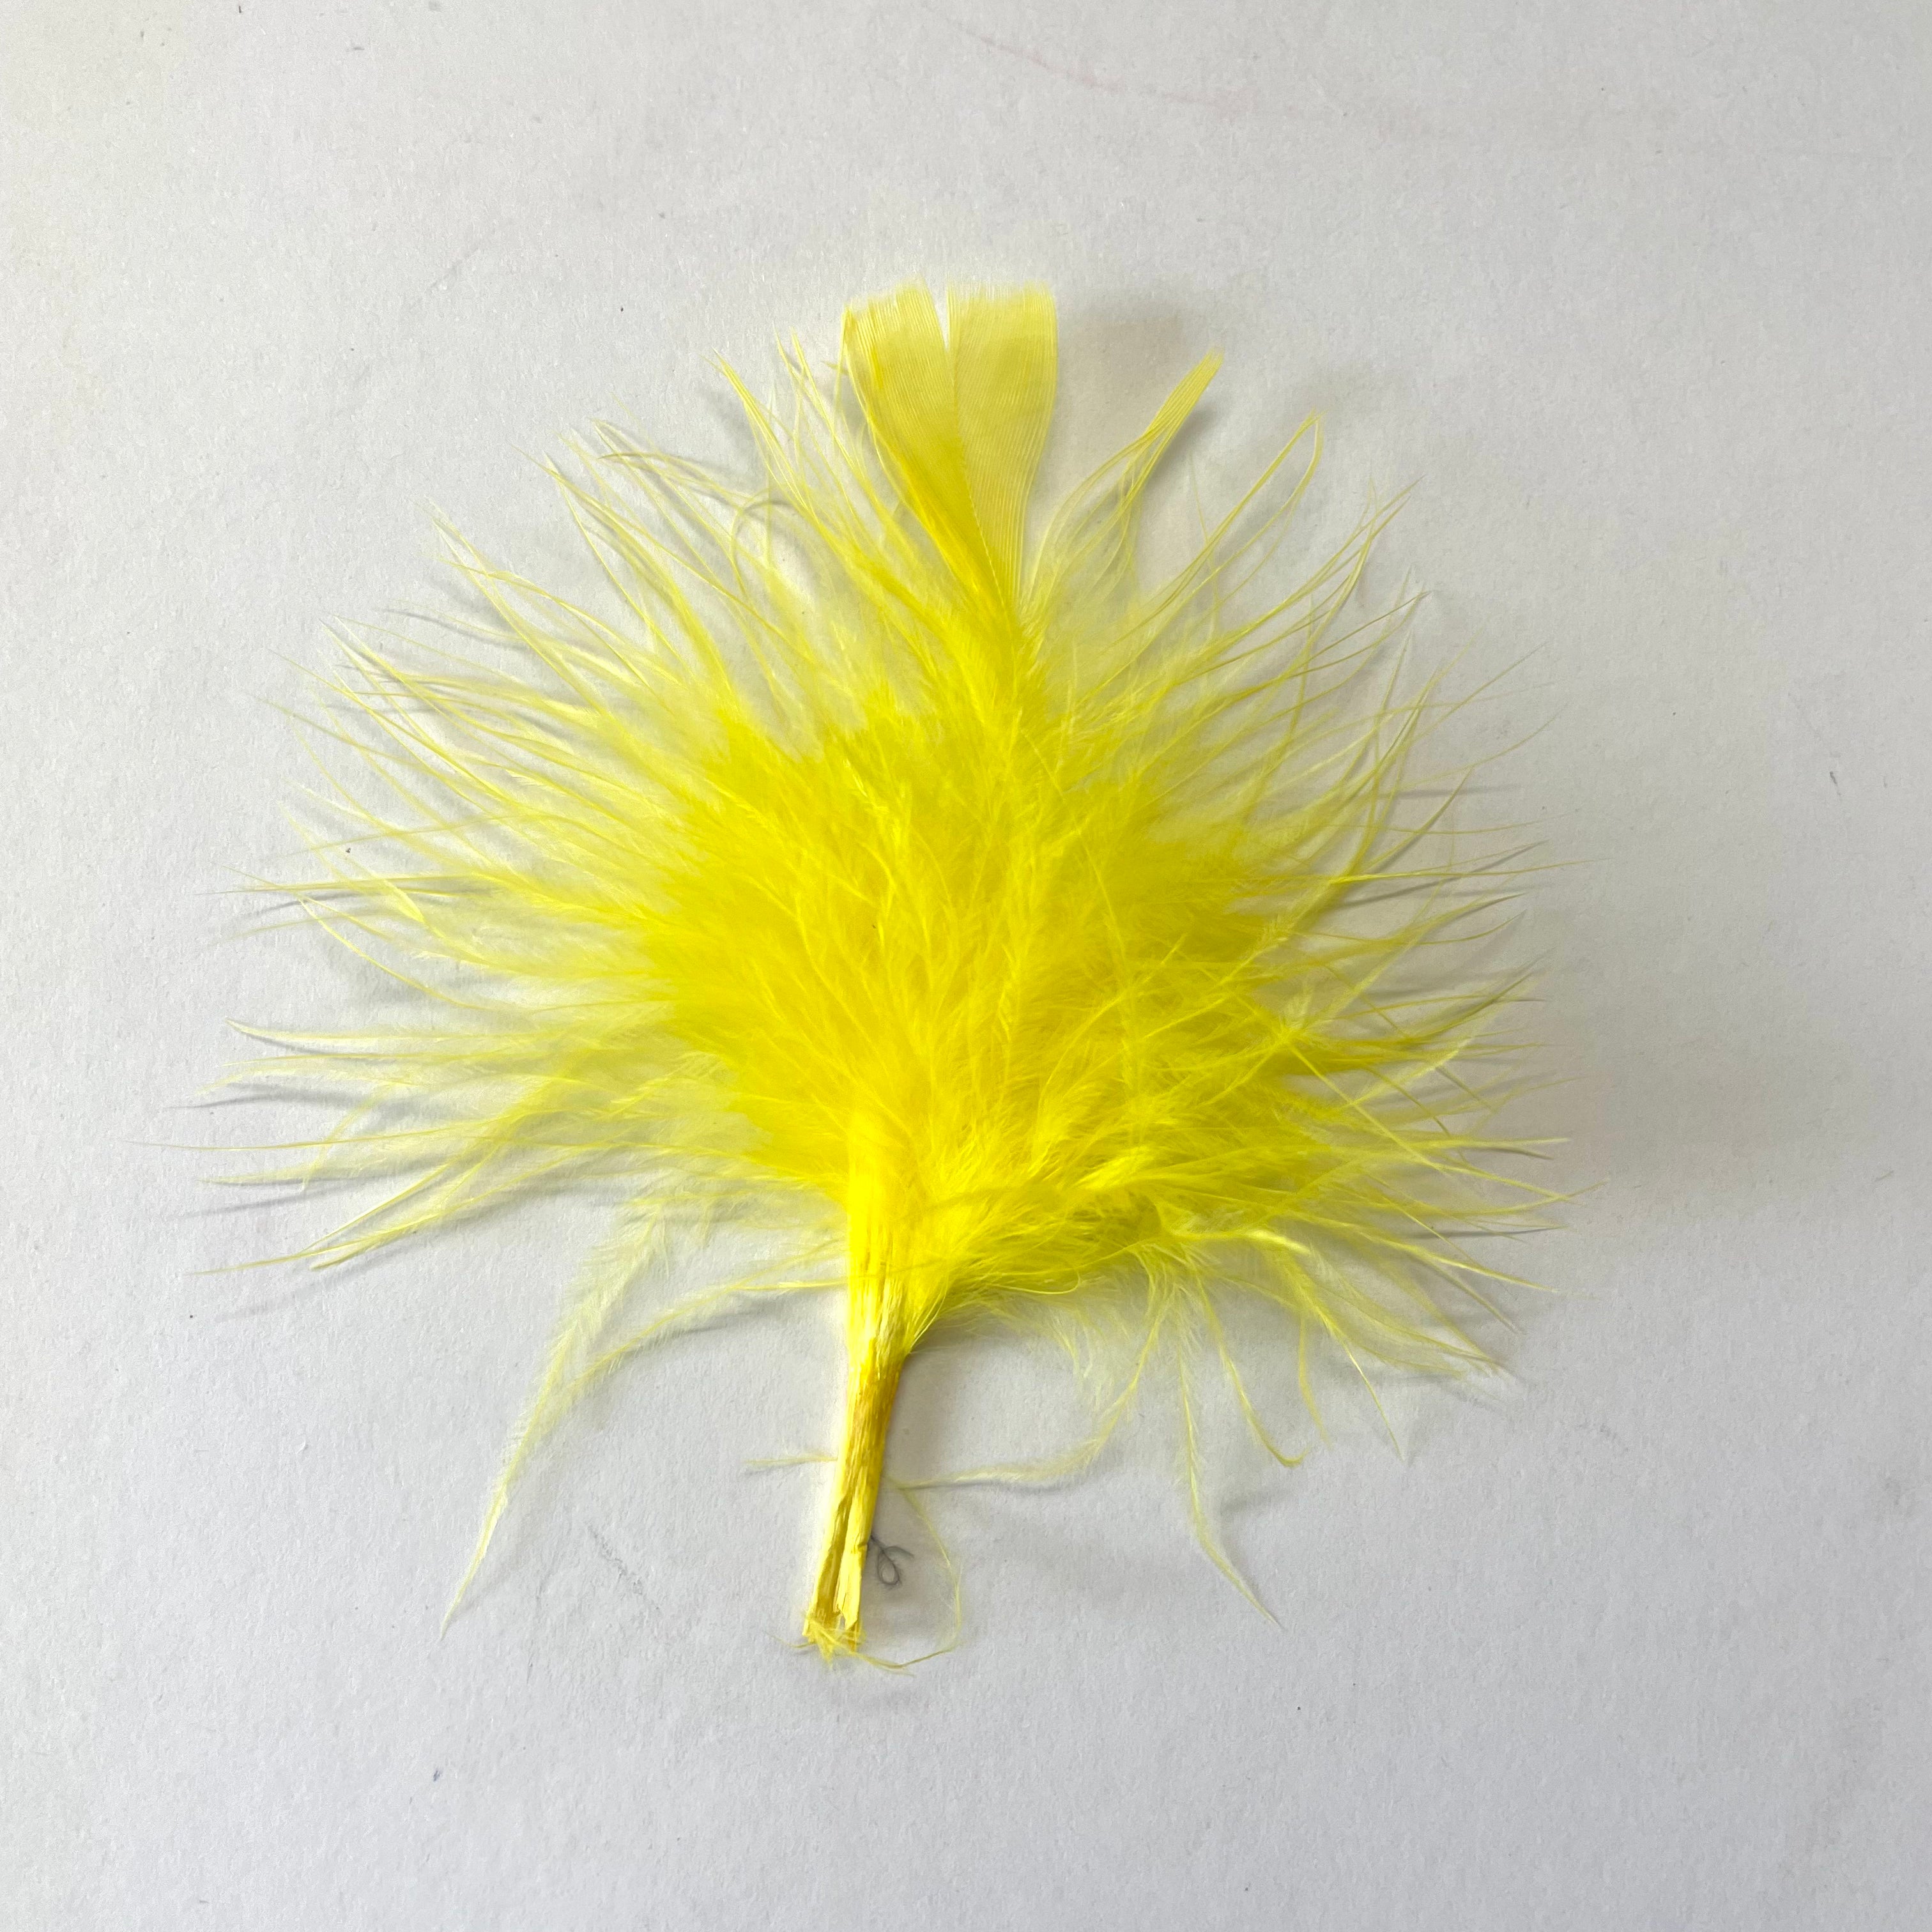 Itty Bitty Marabou Feather Plumage Pack 10 grams - Yellow